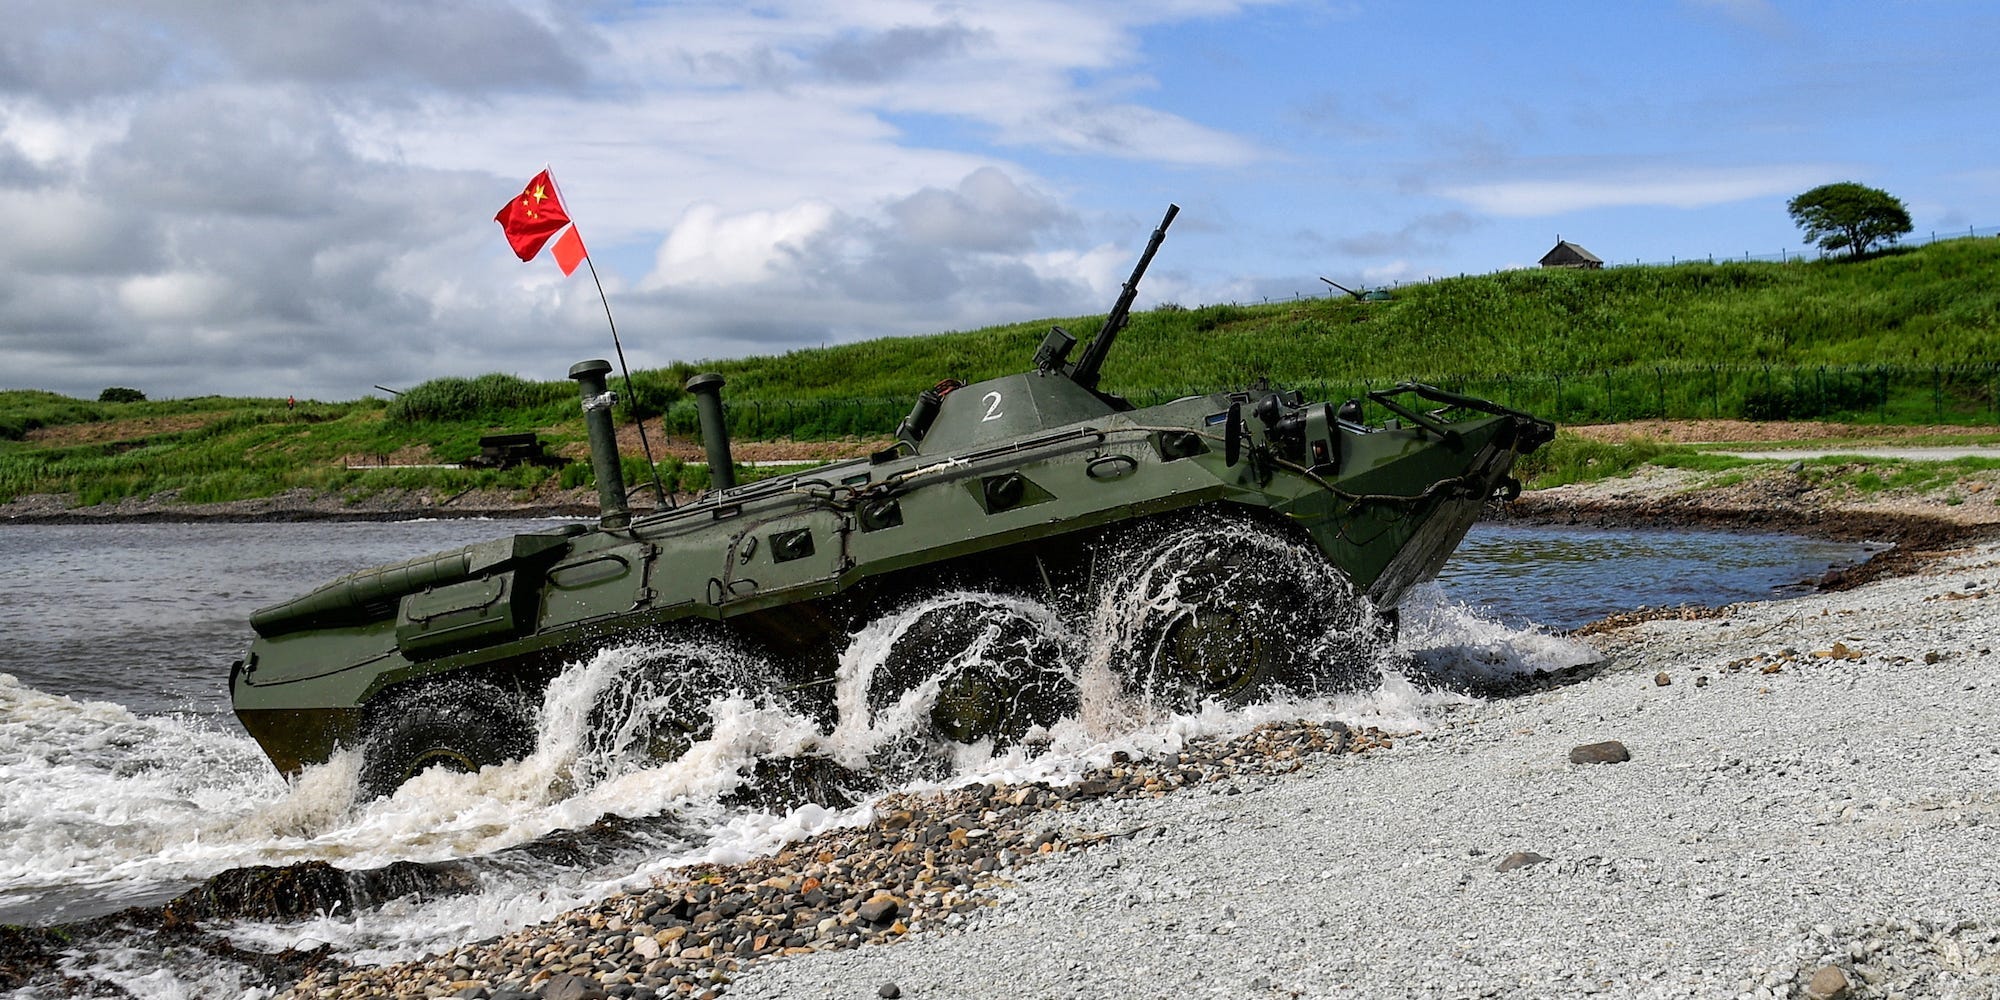 China army armored personnel carrier seaborne amphibious assault